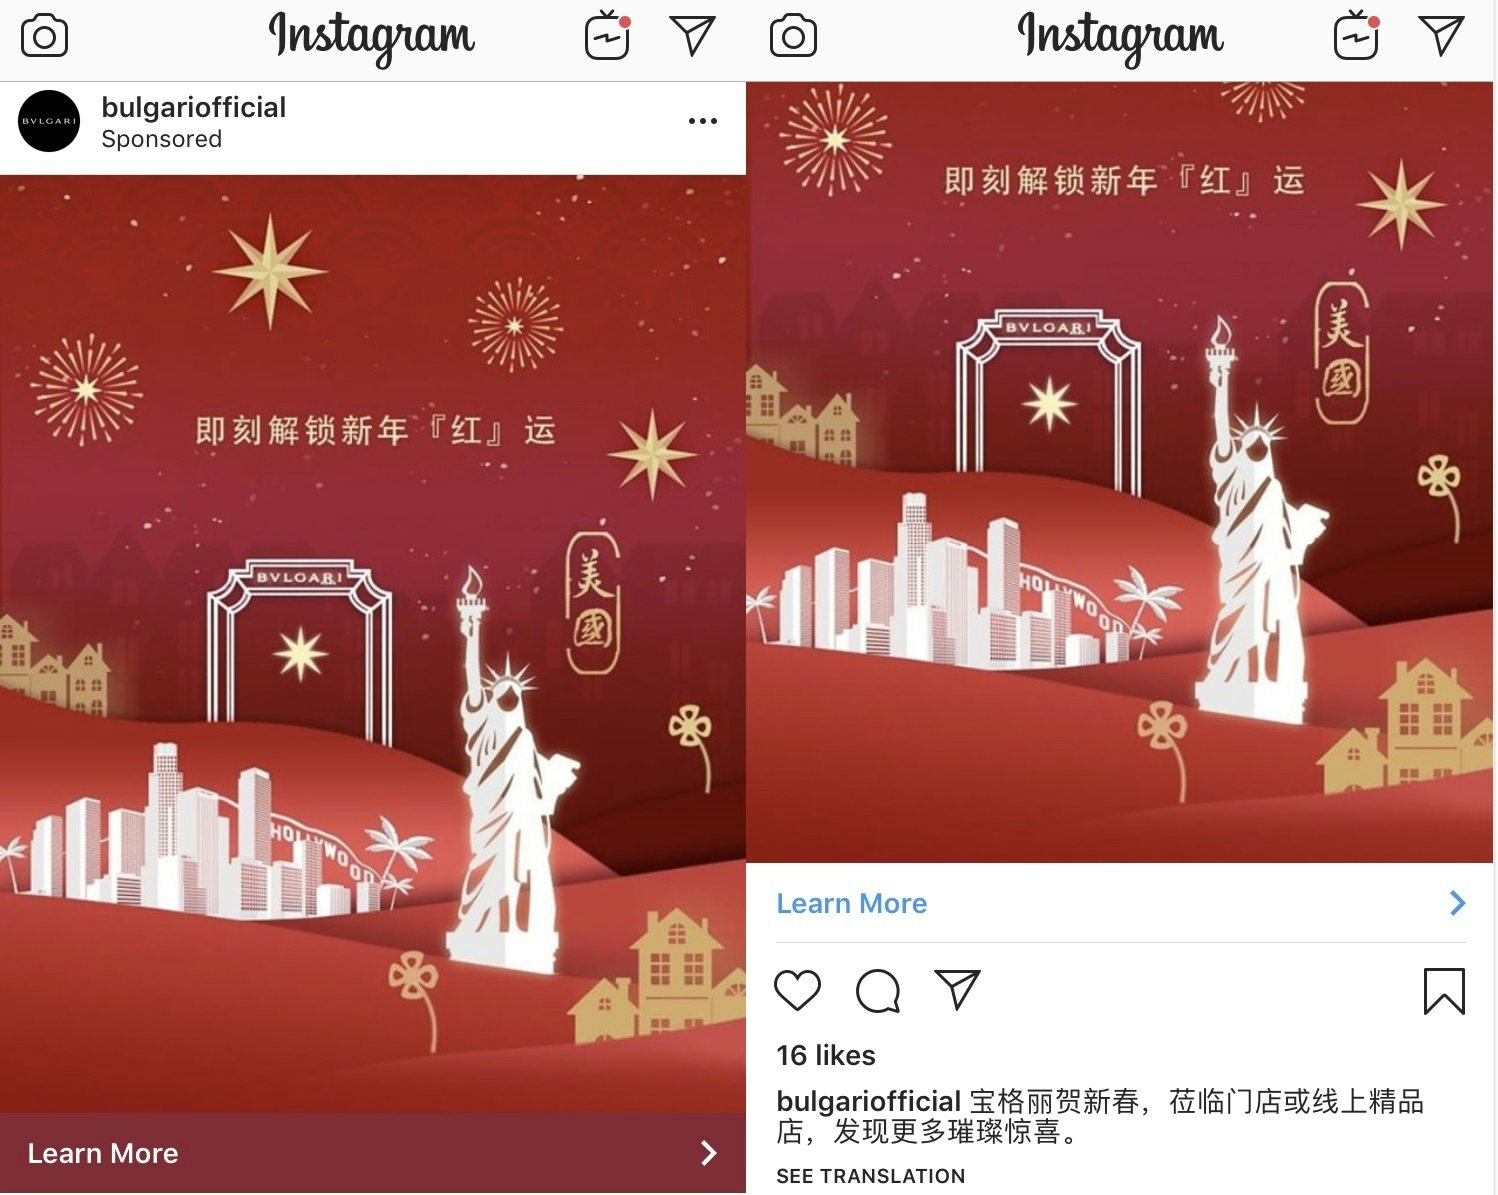 Bvlgari wrote its Chinese Lunar New Year post in Mandarin on Instagram. Photo: Jing Daily illustration